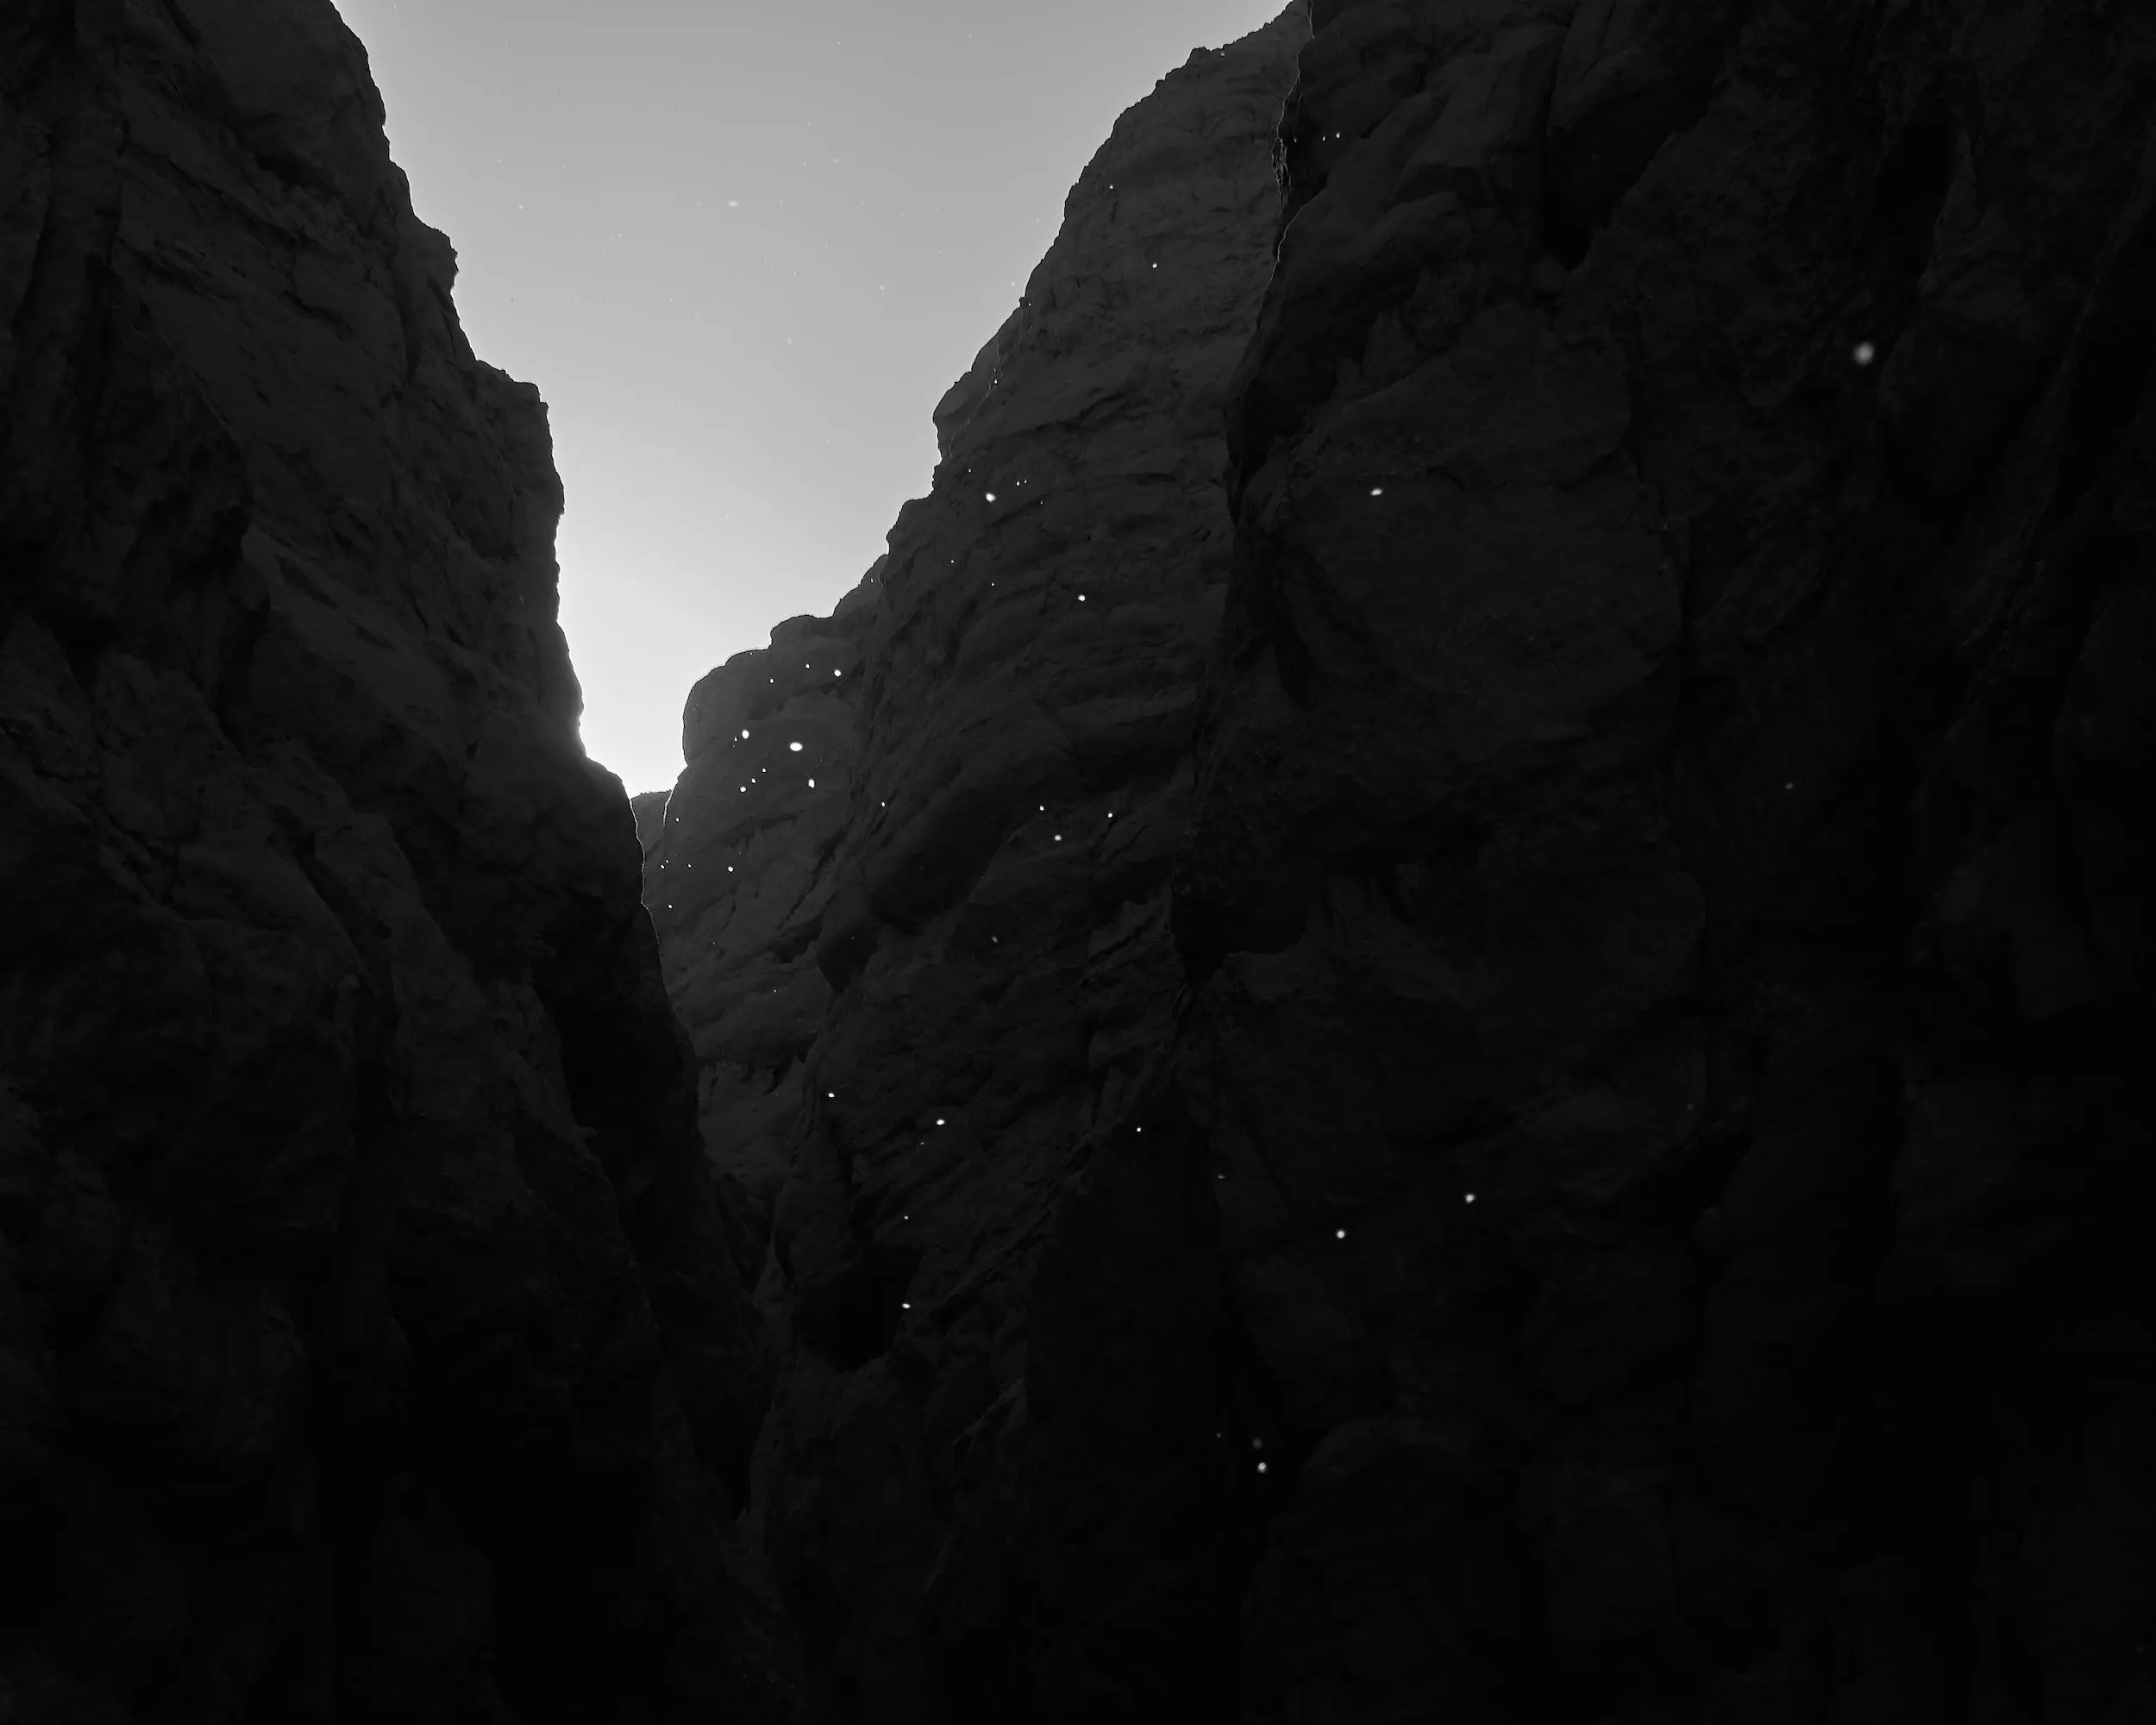 Black and white shot of gnats glowing like stars in a narrow slot canyon.